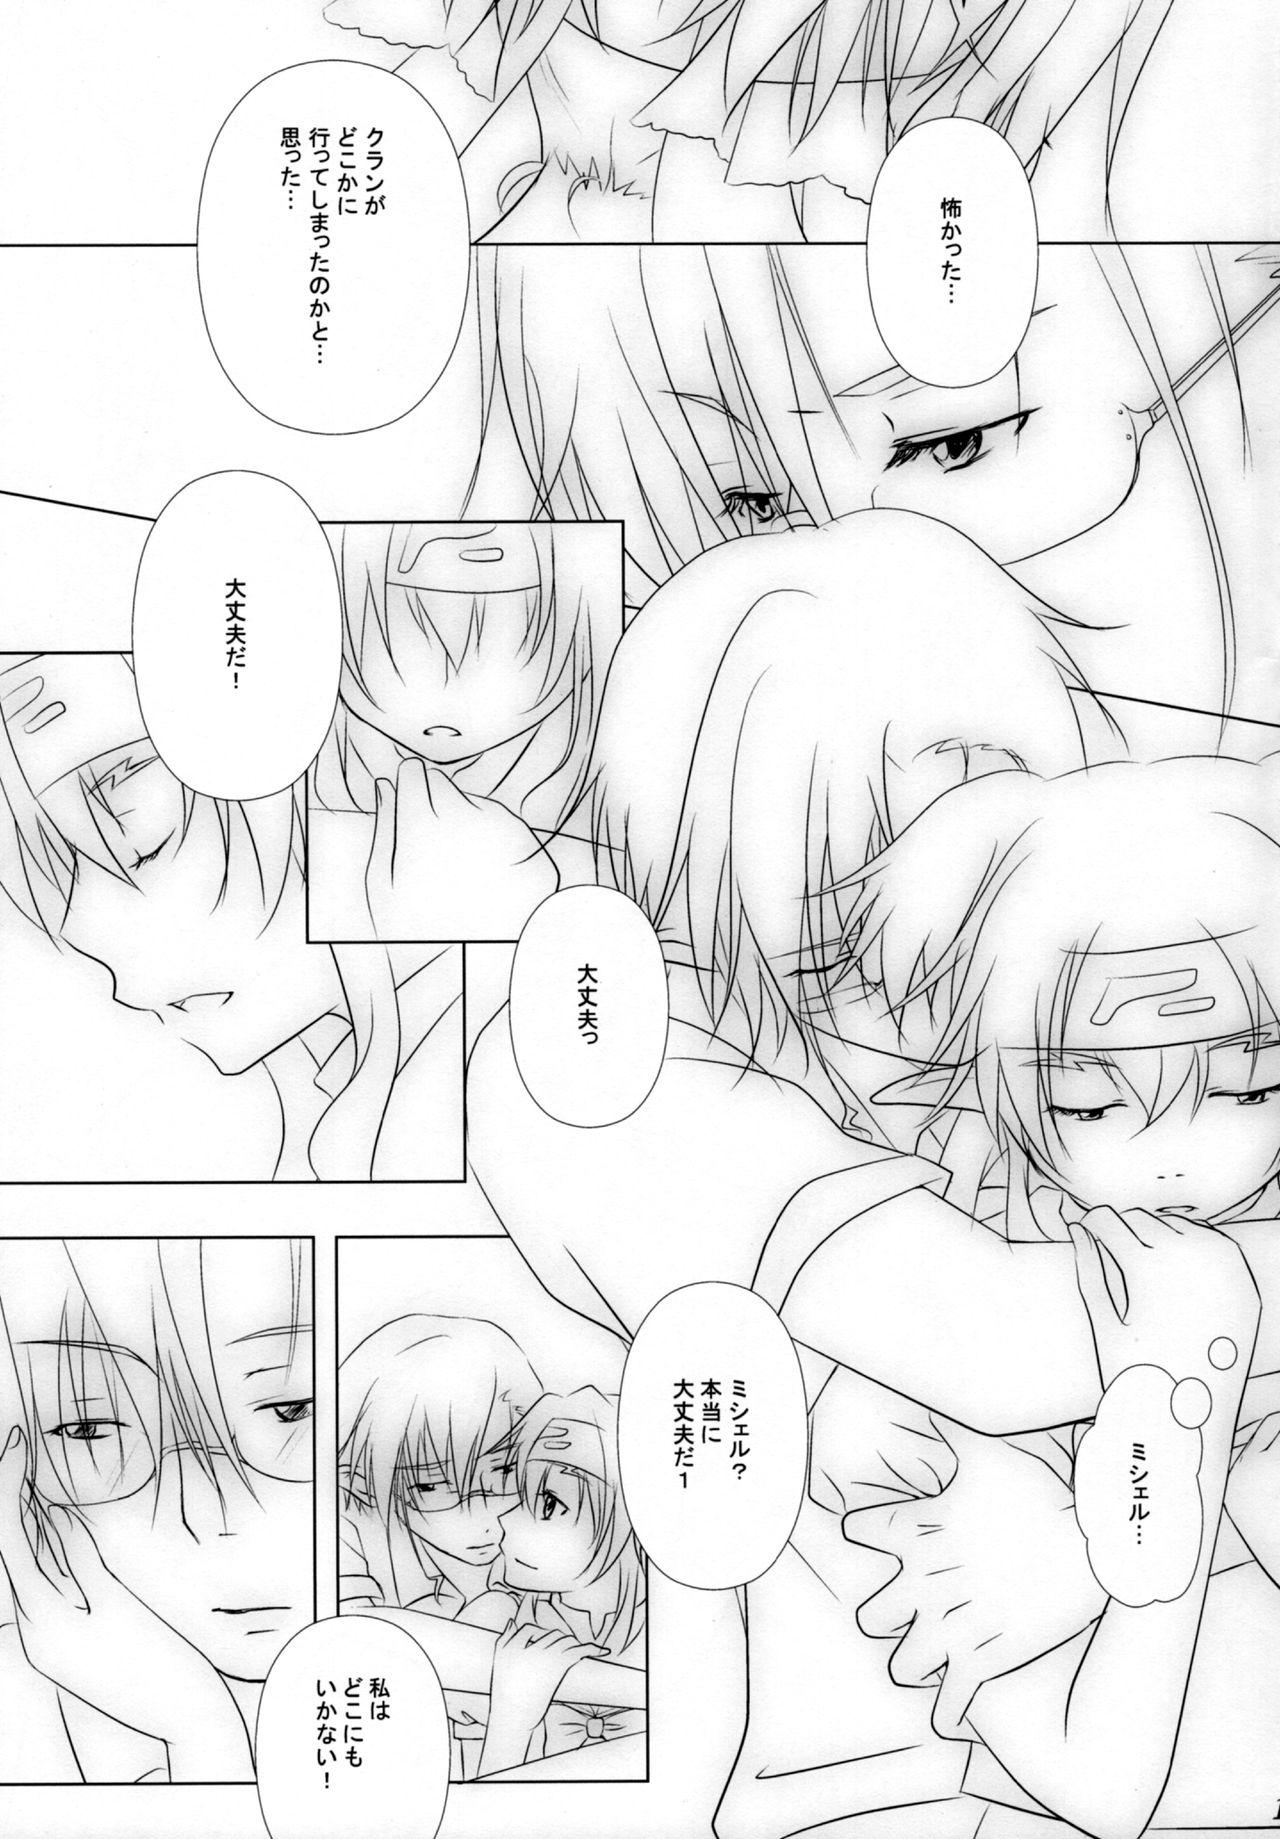 Girl Ever moment with you - Macross frontier Rough - Page 10